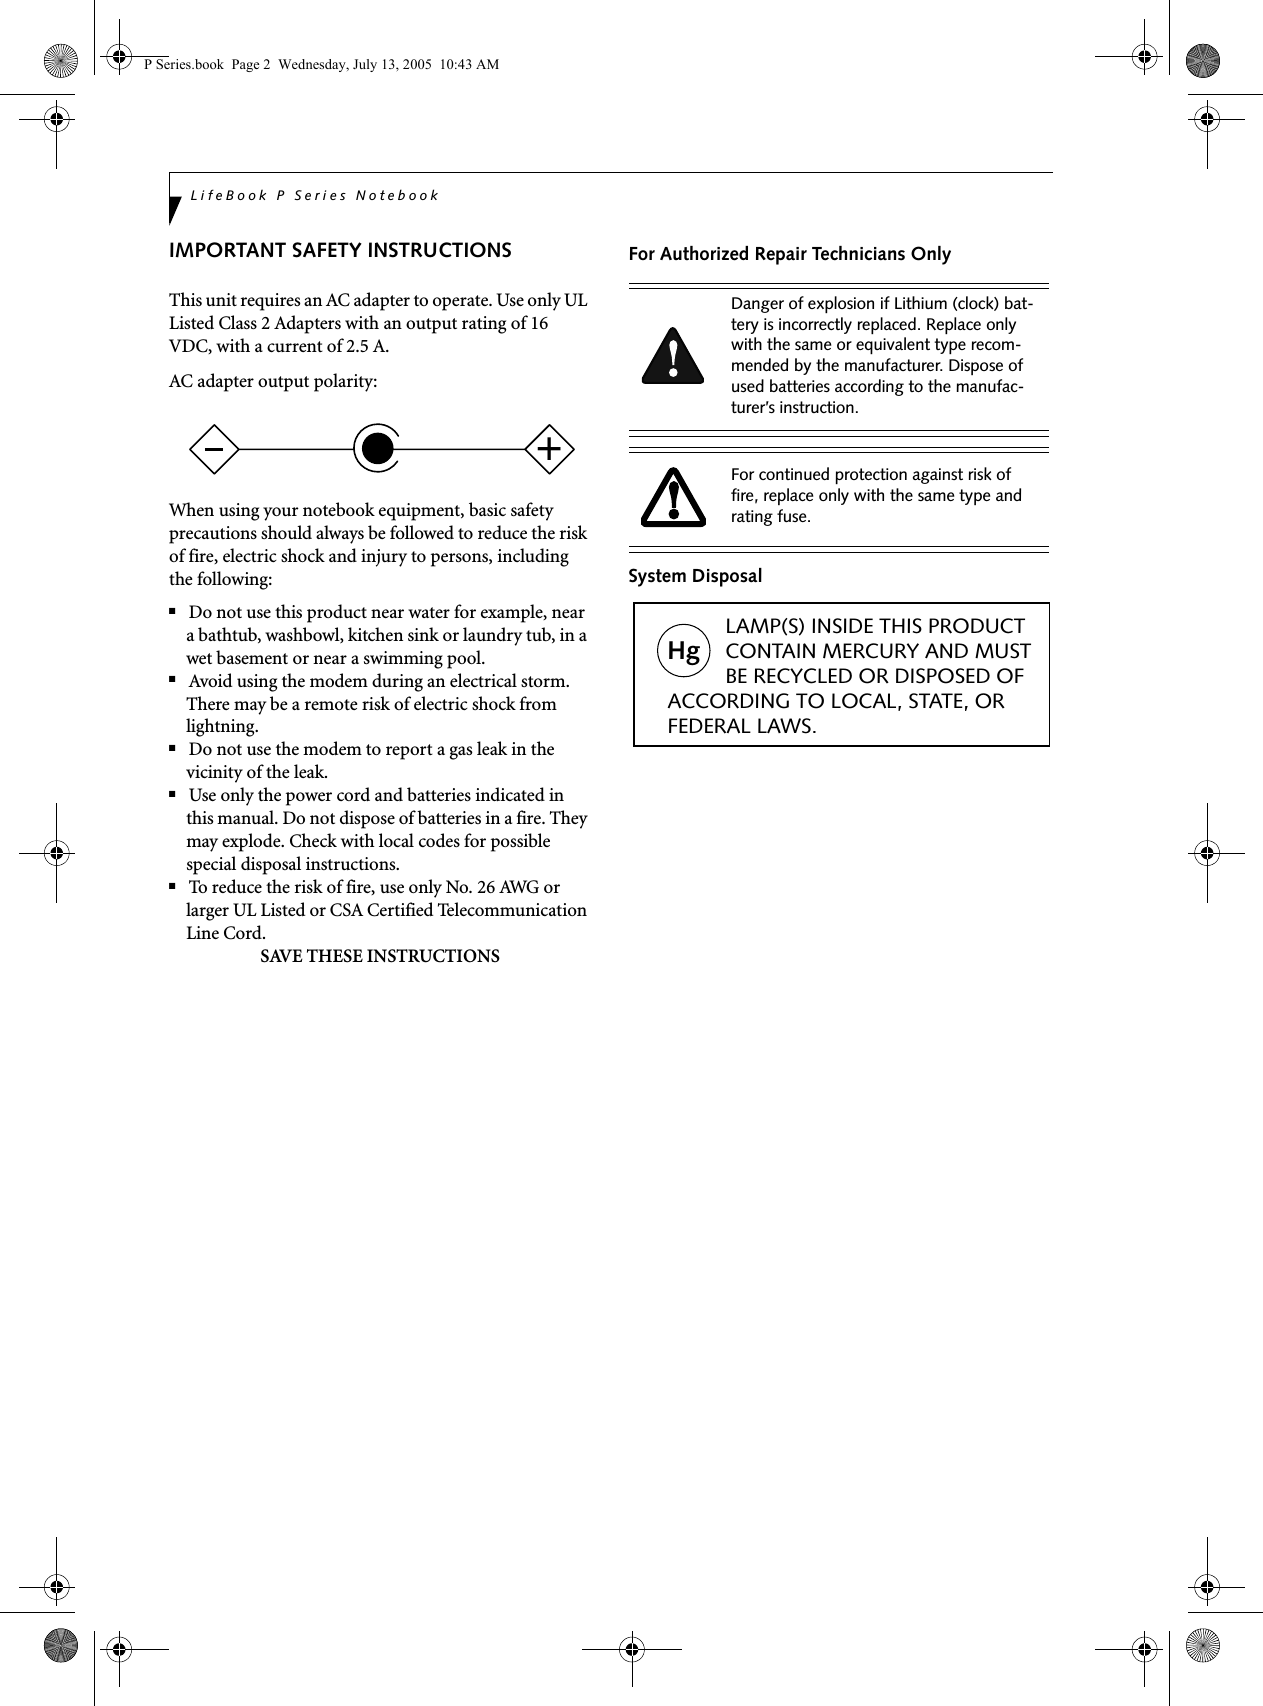 LifeBook P Series NotebookIMPORTANT SAFETY INSTRUCTIONS This unit requires an AC adapter to operate. Use only UL Listed Class 2 Adapters with an output rating of 16 VDC, with a current of 2.5 A.AC adapter output polarity:When using your notebook equipment, basic safety precautions should always be followed to reduce the risk of fire, electric shock and injury to persons, including the following:■Do not use this product near water for example, near a bathtub, washbowl, kitchen sink or laundry tub, in a wet basement or near a swimming pool.■Avoid using the modem during an electrical storm. There may be a remote risk of electric shock from lightning.■Do not use the modem to report a gas leak in the vicinity of the leak.■Use only the power cord and batteries indicated in this manual. Do not dispose of batteries in a fire. They may explode. Check with local codes for possible special disposal instructions.■To reduce the risk of fire, use only No. 26 AWG or larger UL Listed or CSA Certified Telecommunication Line Cord.SAVE THESE INSTRUCTIONSFor Authorized Repair Technicians OnlySystem Disposal+Danger of explosion if Lithium (clock) bat-tery is incorrectly replaced. Replace only with the same or equivalent type recom-mended by the manufacturer. Dispose of used batteries according to the manufac-turer’s instruction.For continued protection against risk of fire, replace only with the same type and rating fuse.Hg          LAMP(S) INSIDE THIS PRODUCT            CONTAIN MERCURY AND MUST          BE RECYCLED OR DISPOSED OF ACCORDING TO LOCAL, STATE, ORFEDERAL LAWS.P Series.book  Page 2  Wednesday, July 13, 2005  10:43 AM